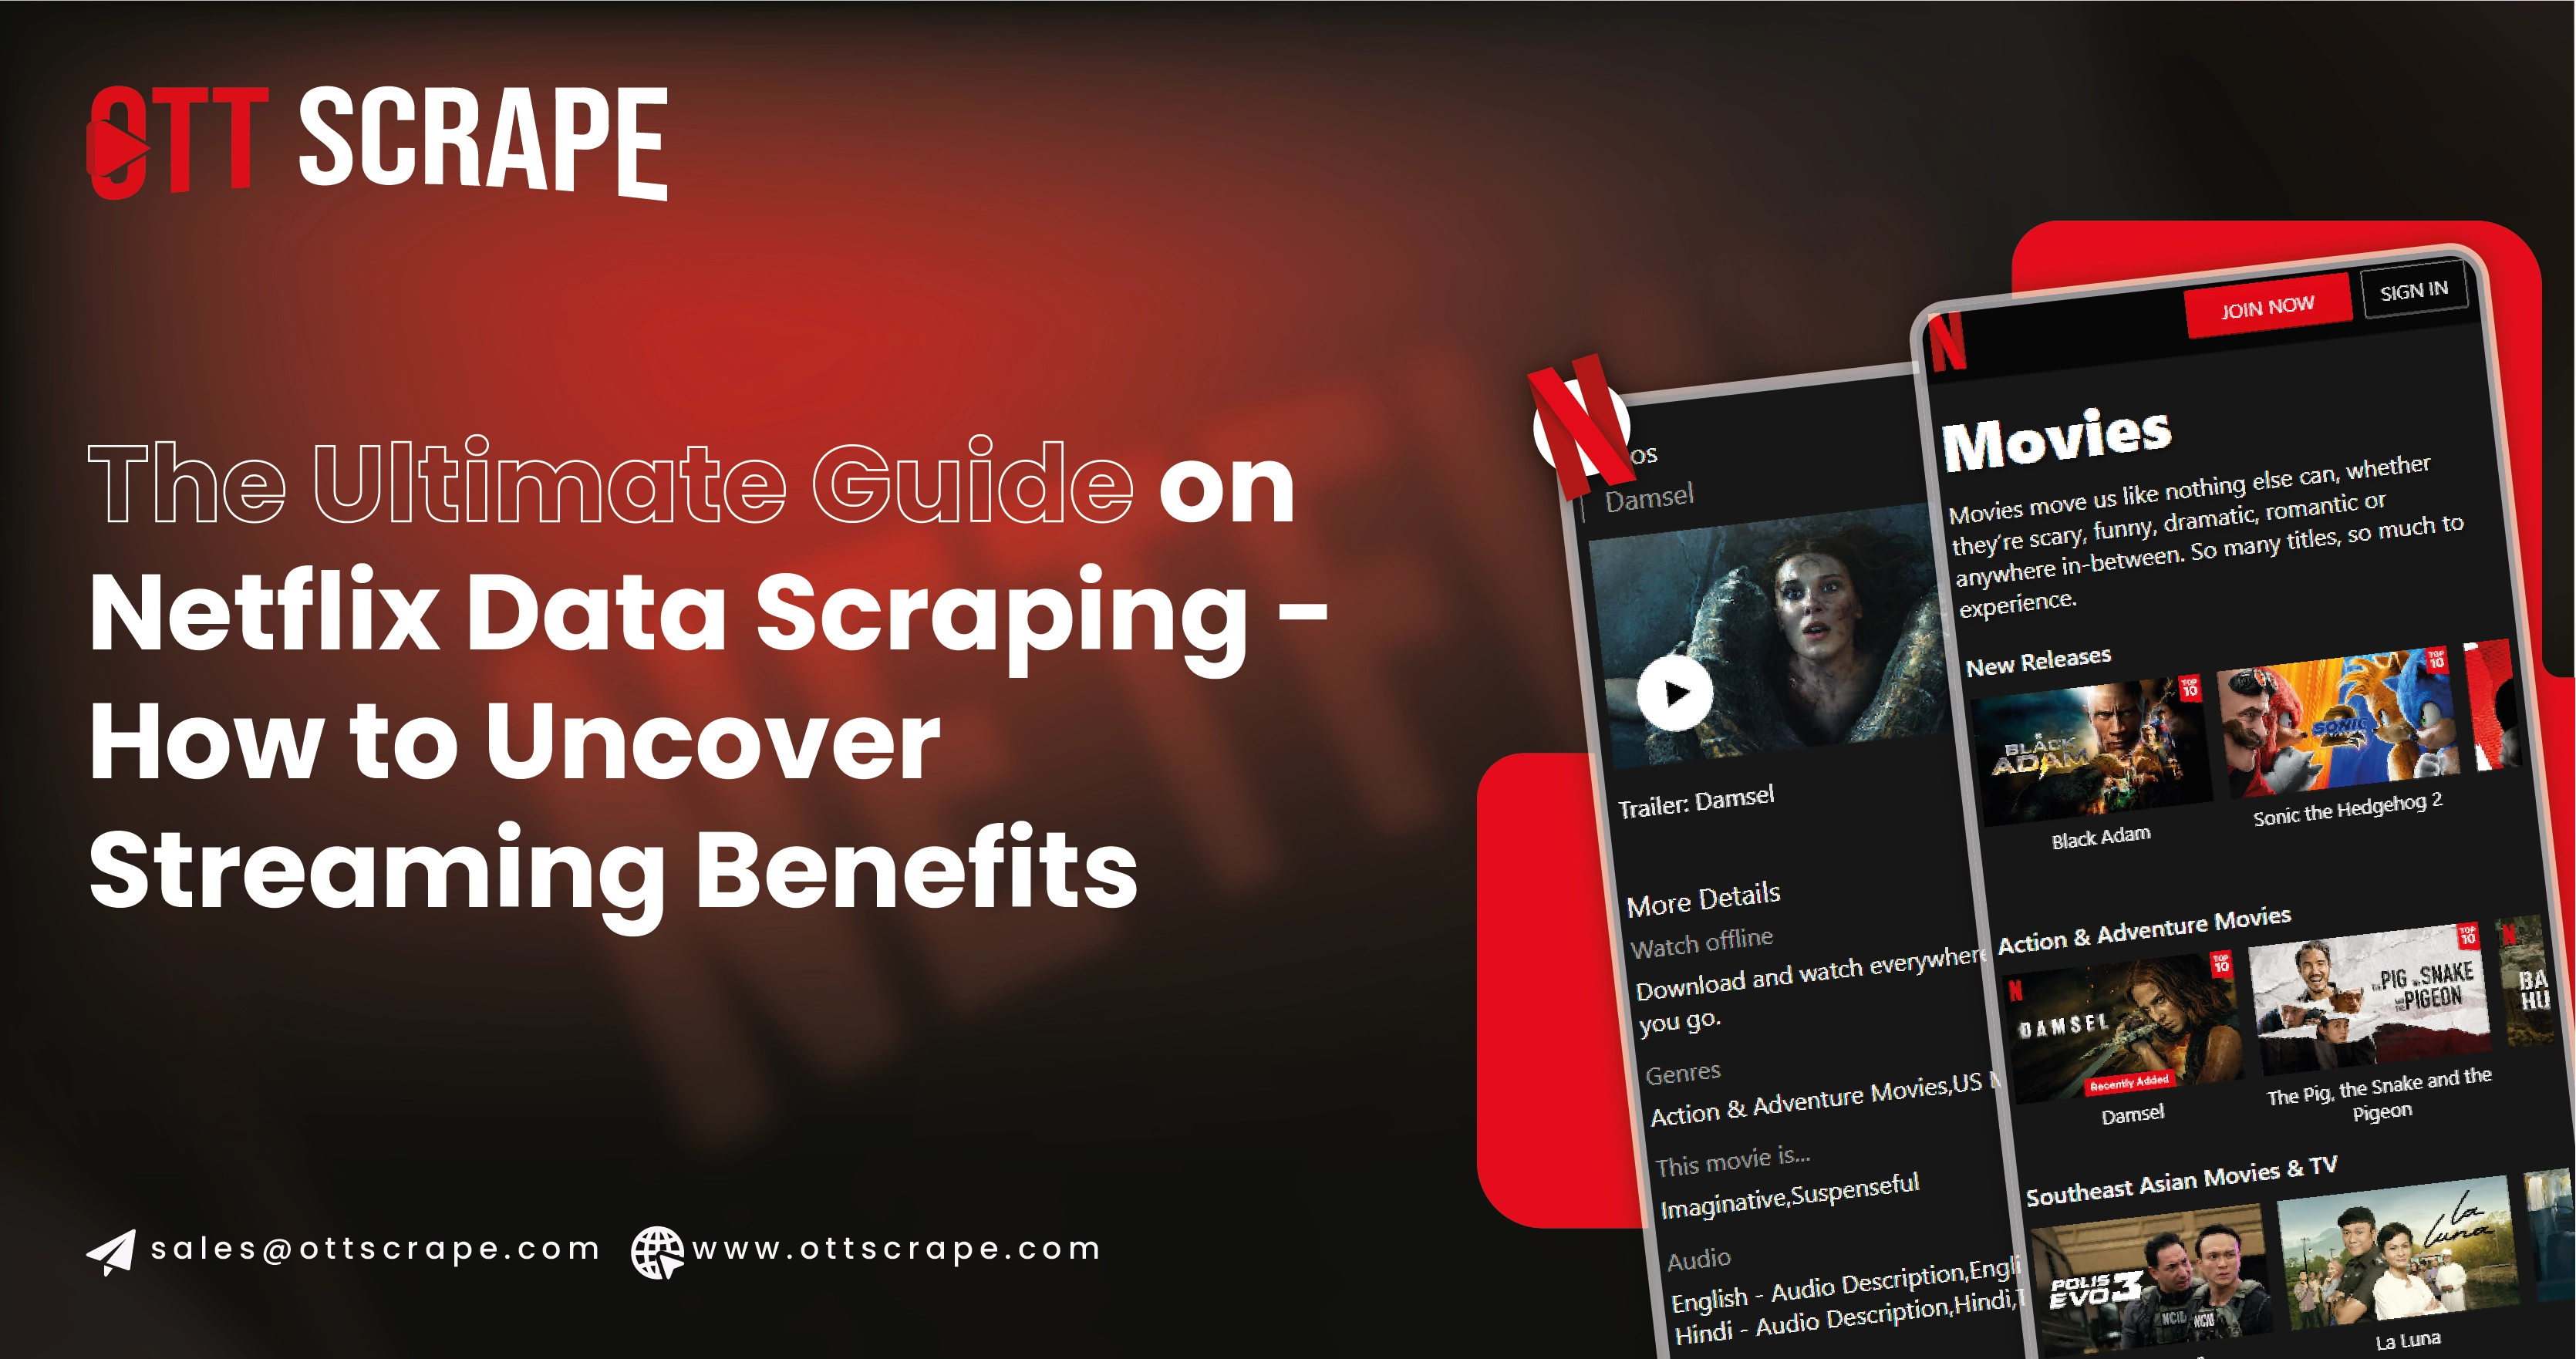 The-Ultimate-Guide-on-Netflix-Data-Scraping-How-to-Uncover-Streaming-Benefits-01